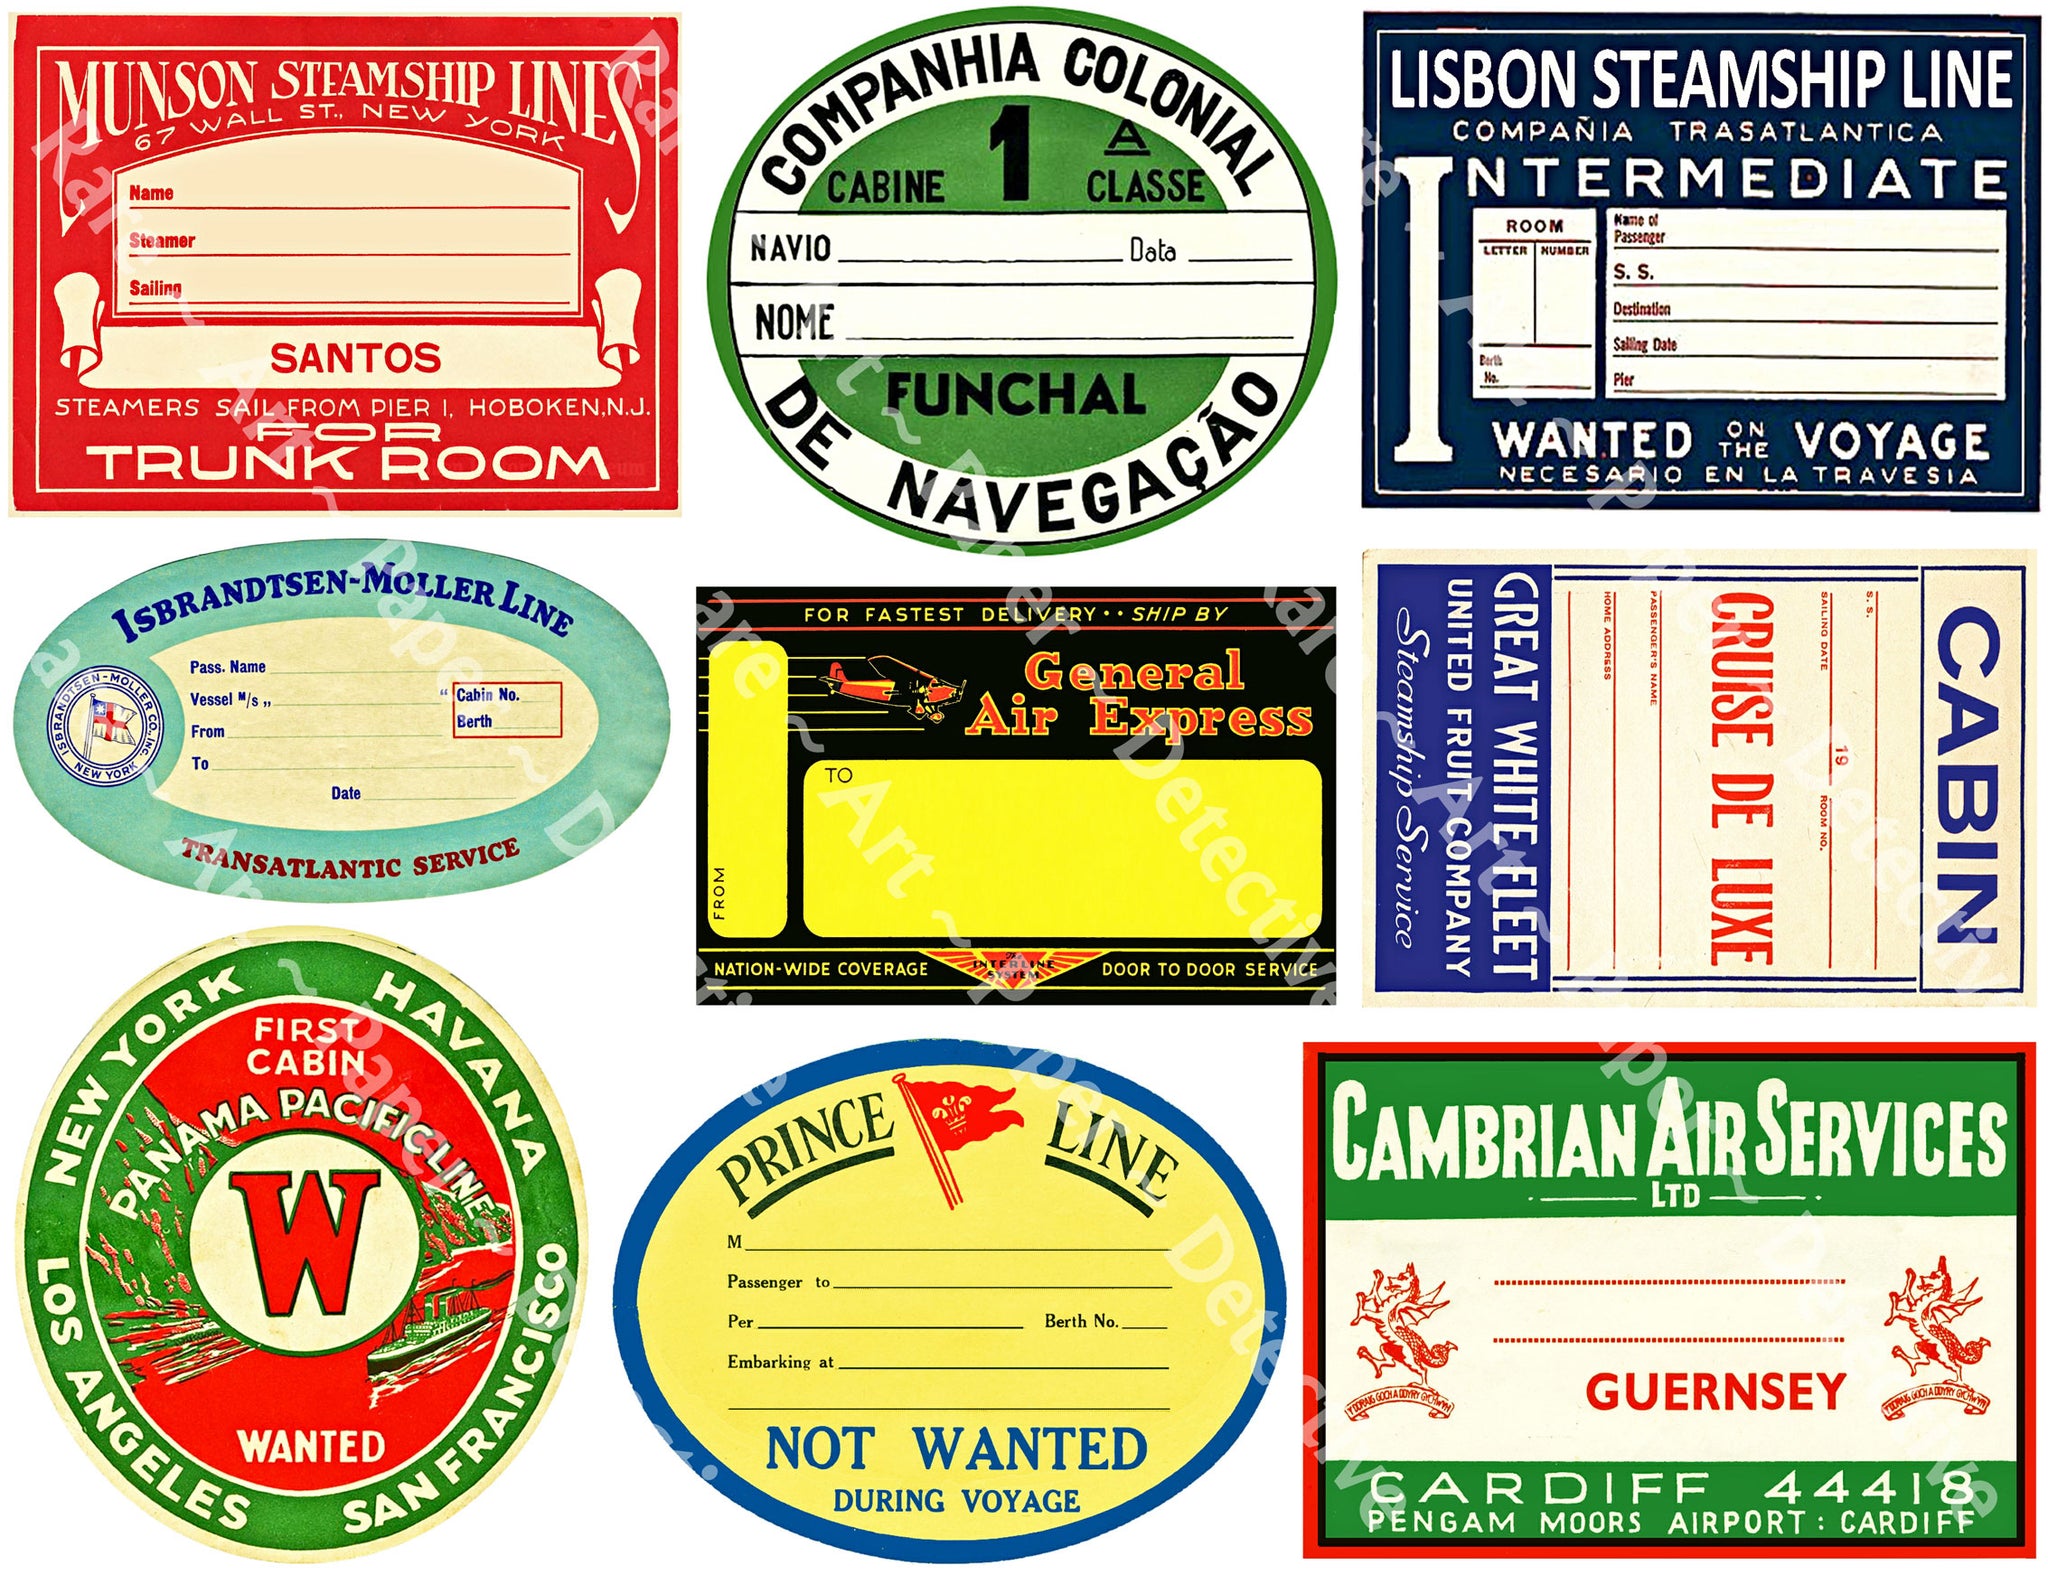 Steamship Luggage Label Sticker Sheet, 9 Travel Stickers from the Golden Age of Travel, 8.5" x 11" Decal Sheet for Suitcases, #897